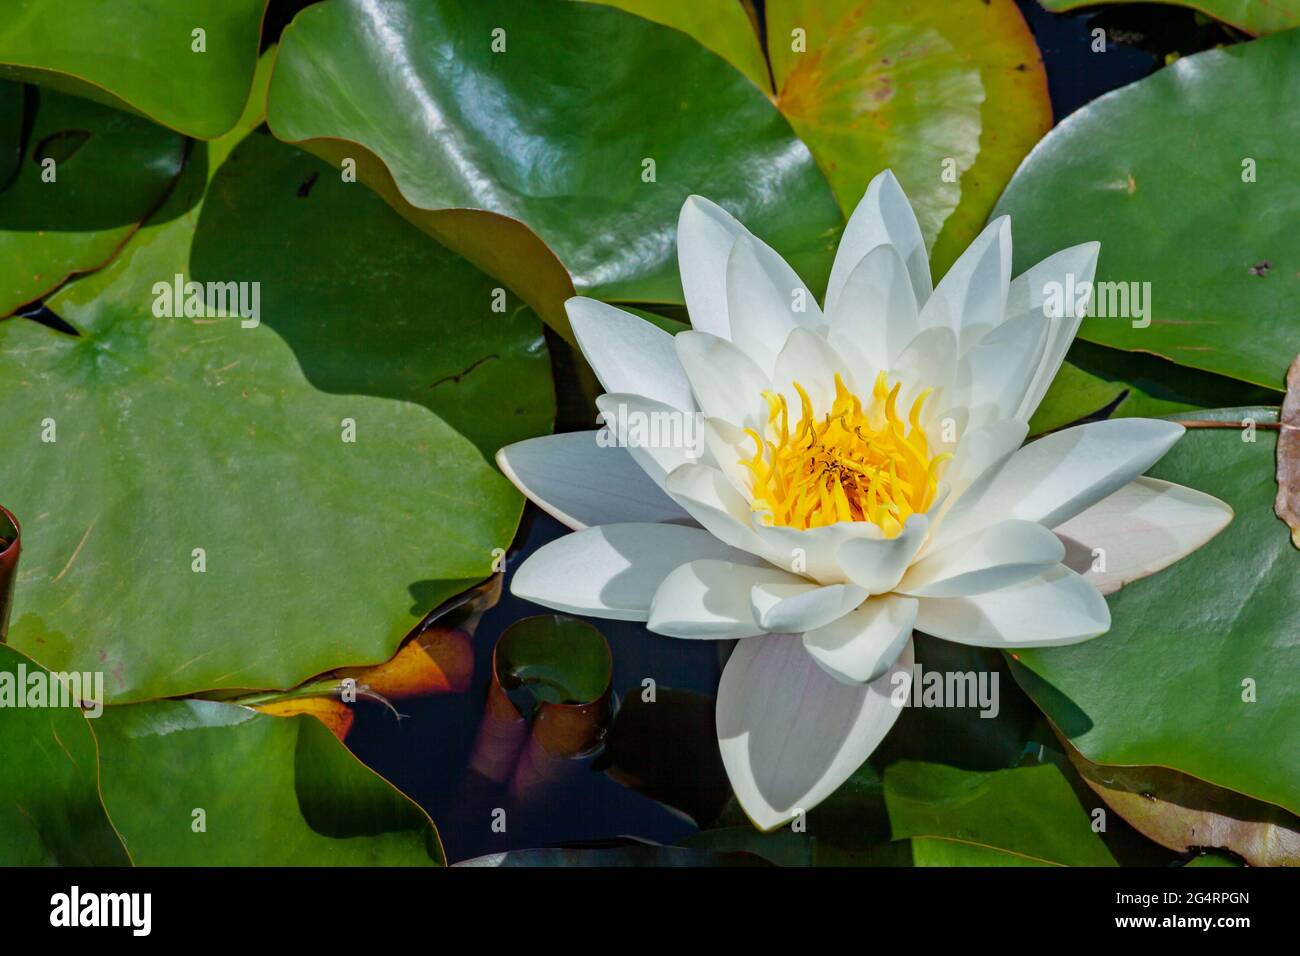 White water lily with yellow petals over green leaves in pond during spring or summer time. Stock Photo